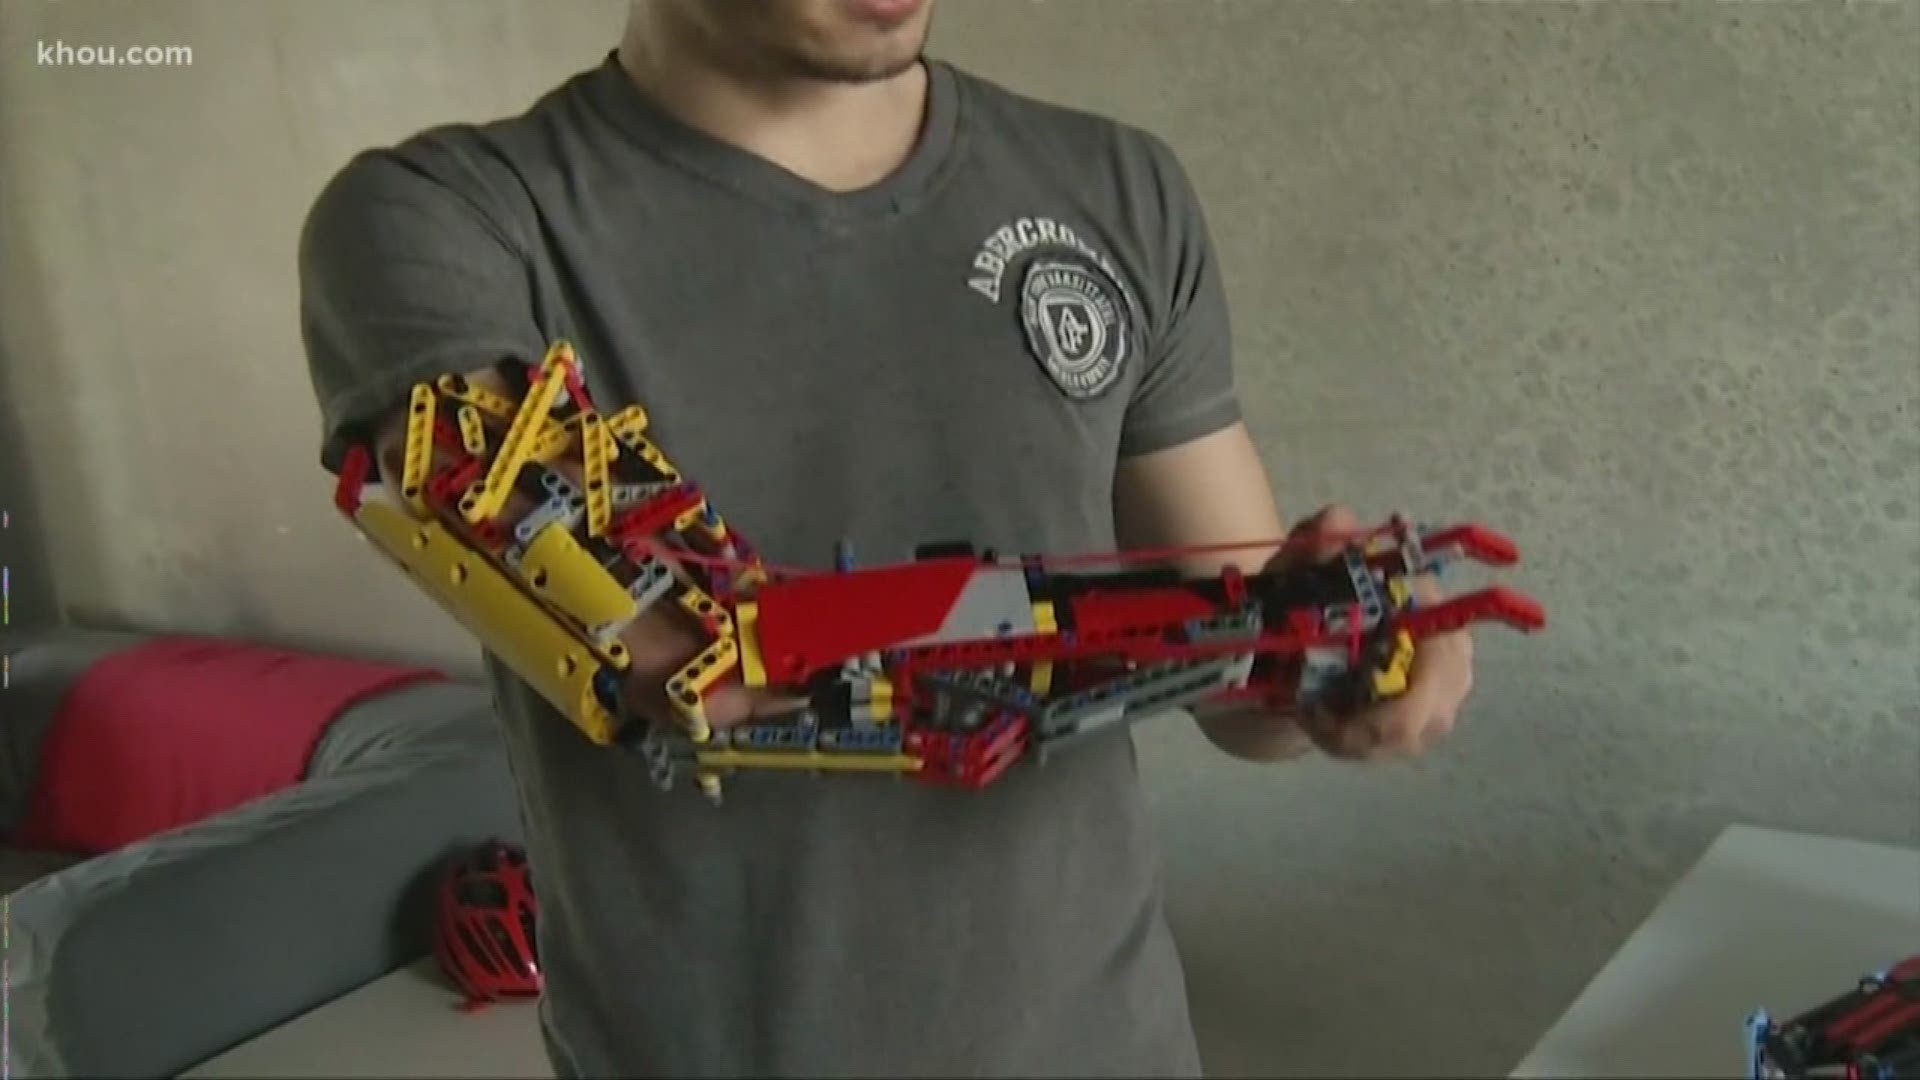 A teen from Spain used his passion for Legos to make a life-changing invention.